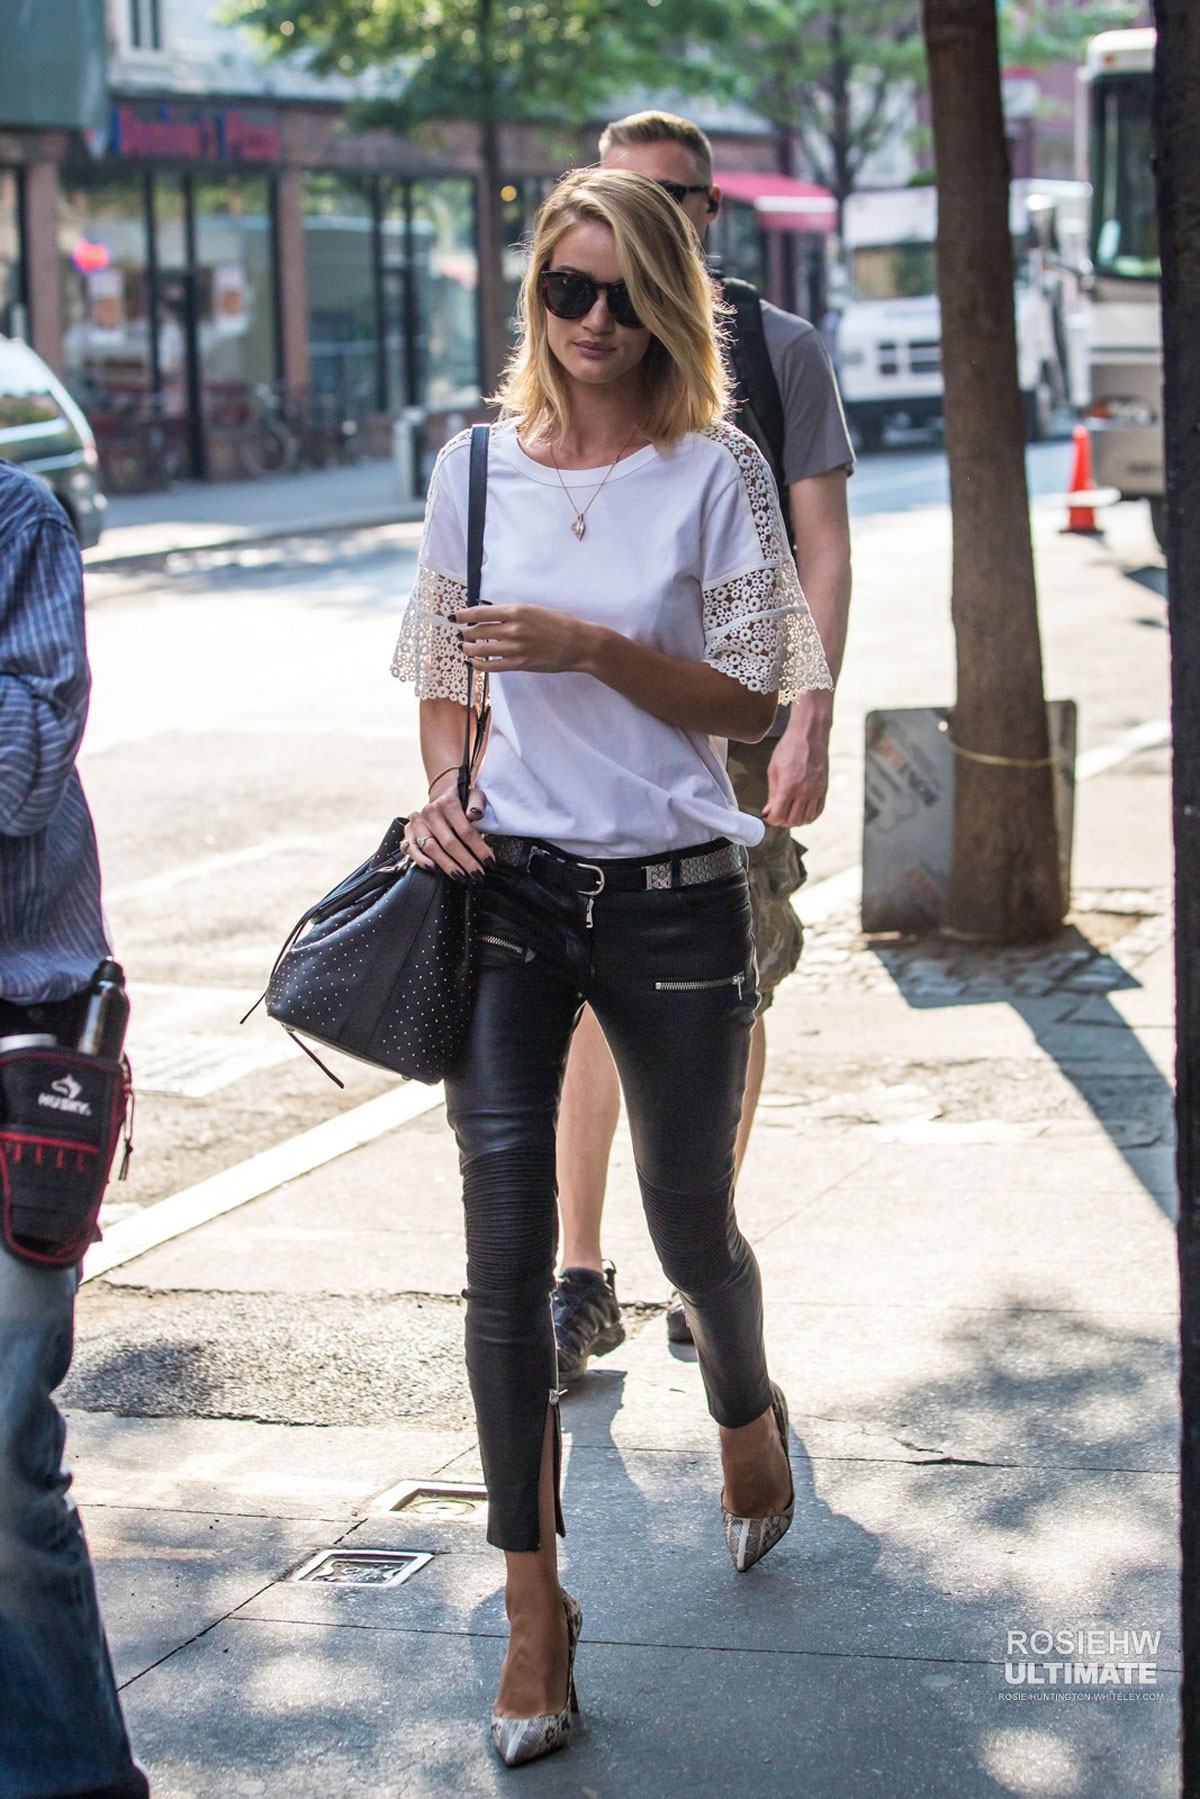 Rosie Huntington-Whiteley is seen stepping out in NYC